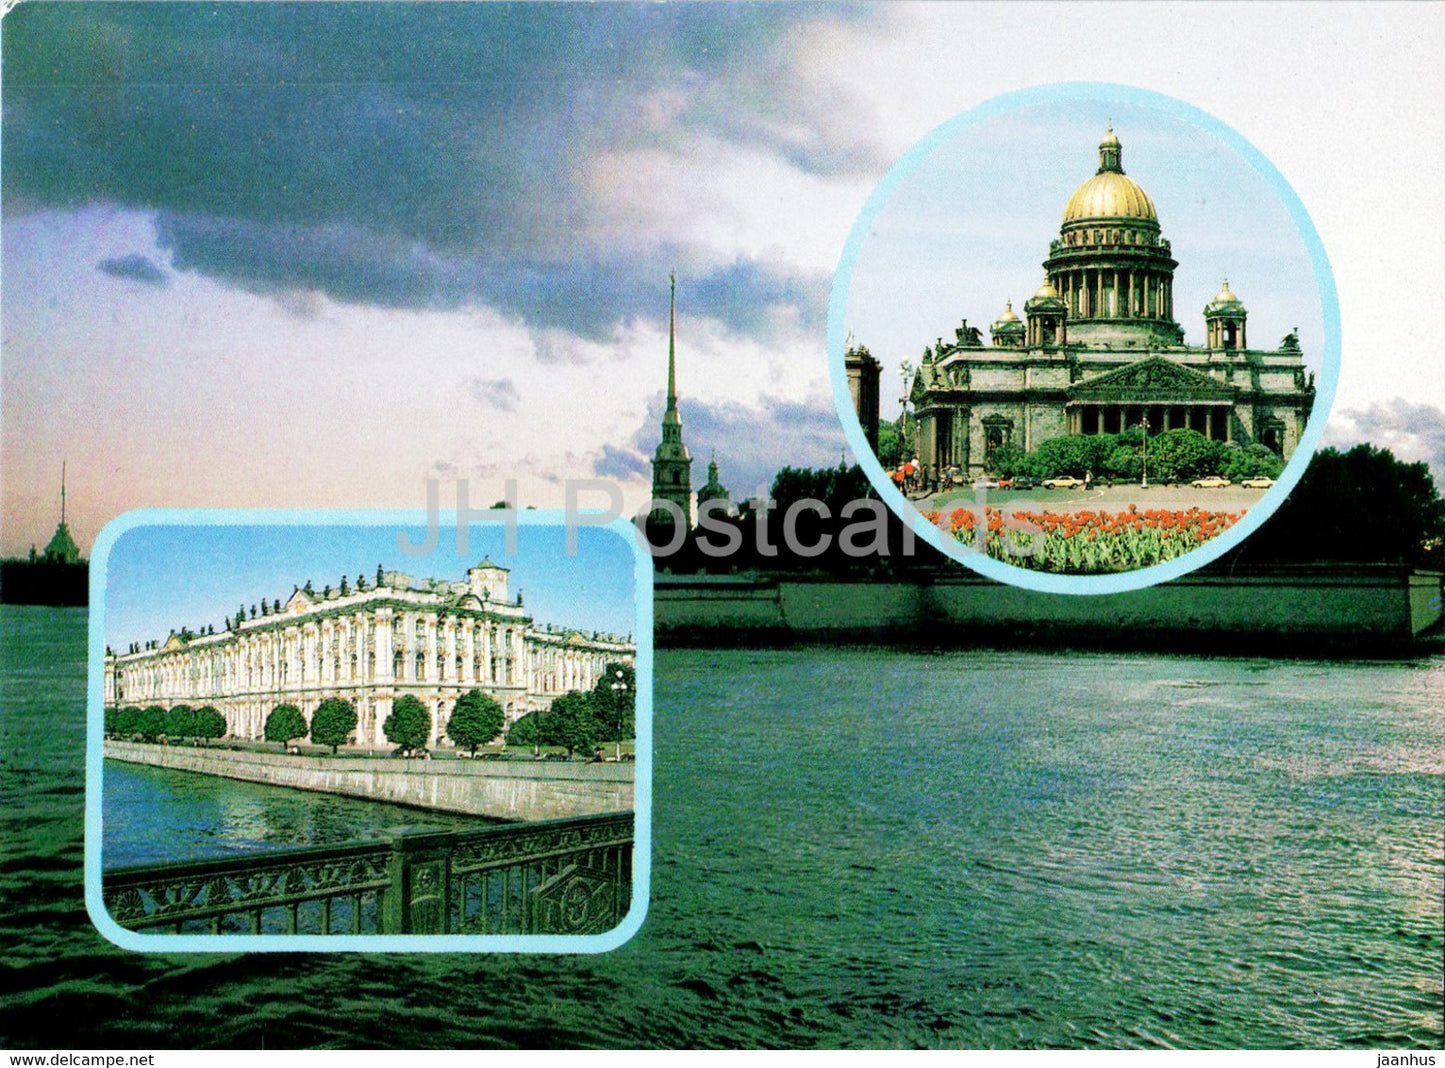 Leningrad - St Petersburg - St Isaac's Cathedral - Winter Palace - postal stationery - 1986 - Russia USSR - unused - JH Postcards